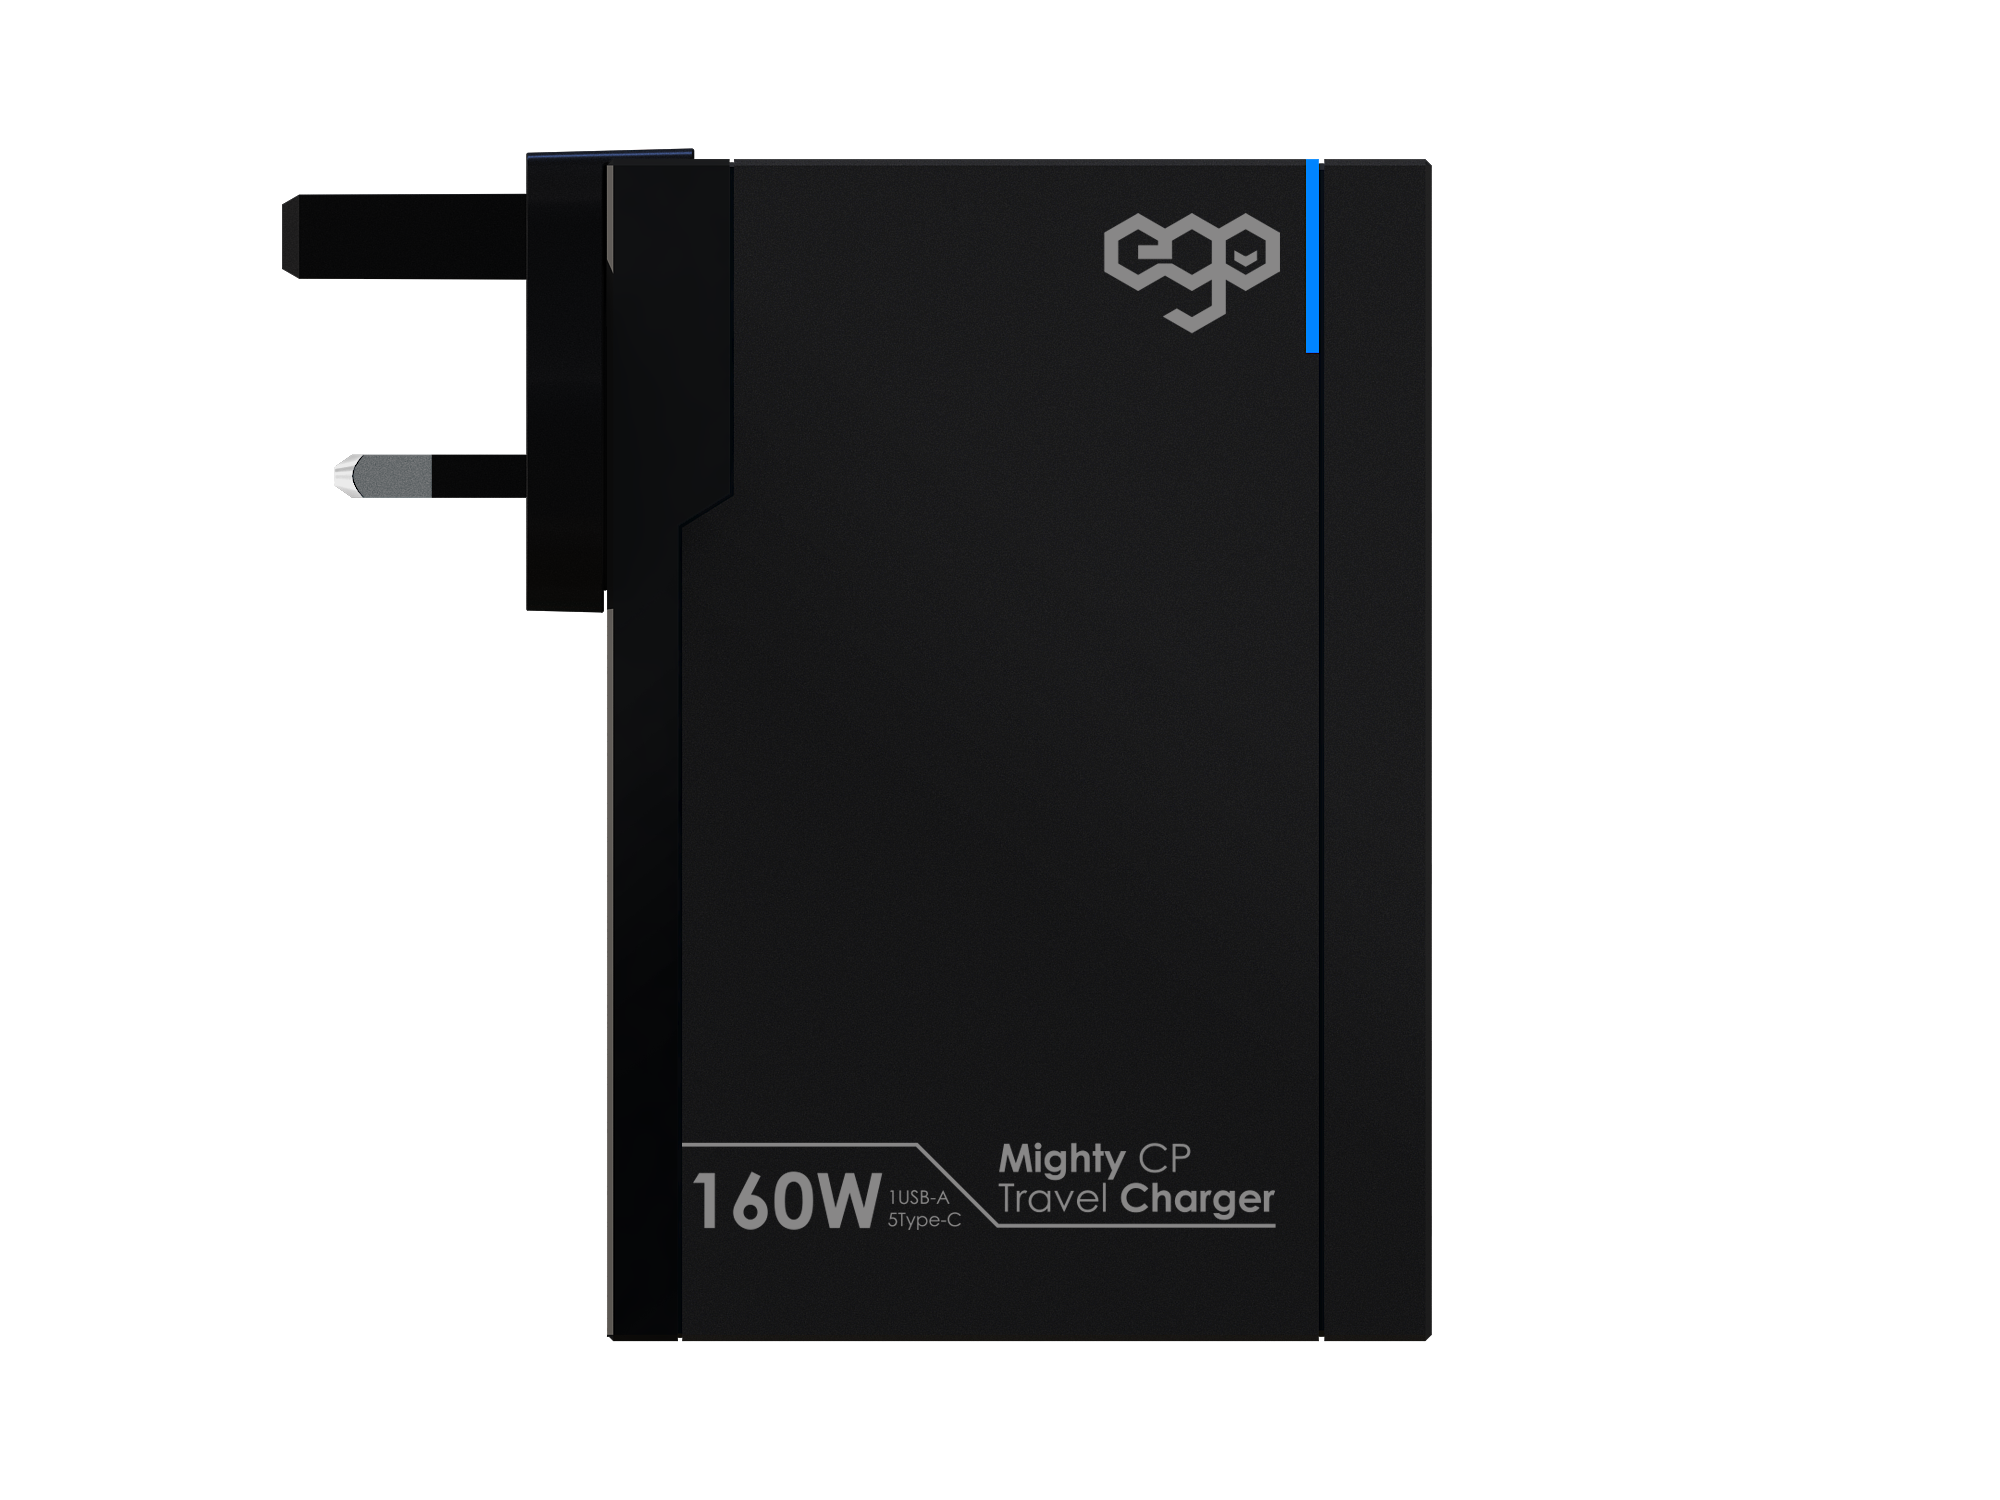 EGO 160W Mighty 6USB Travel Charger